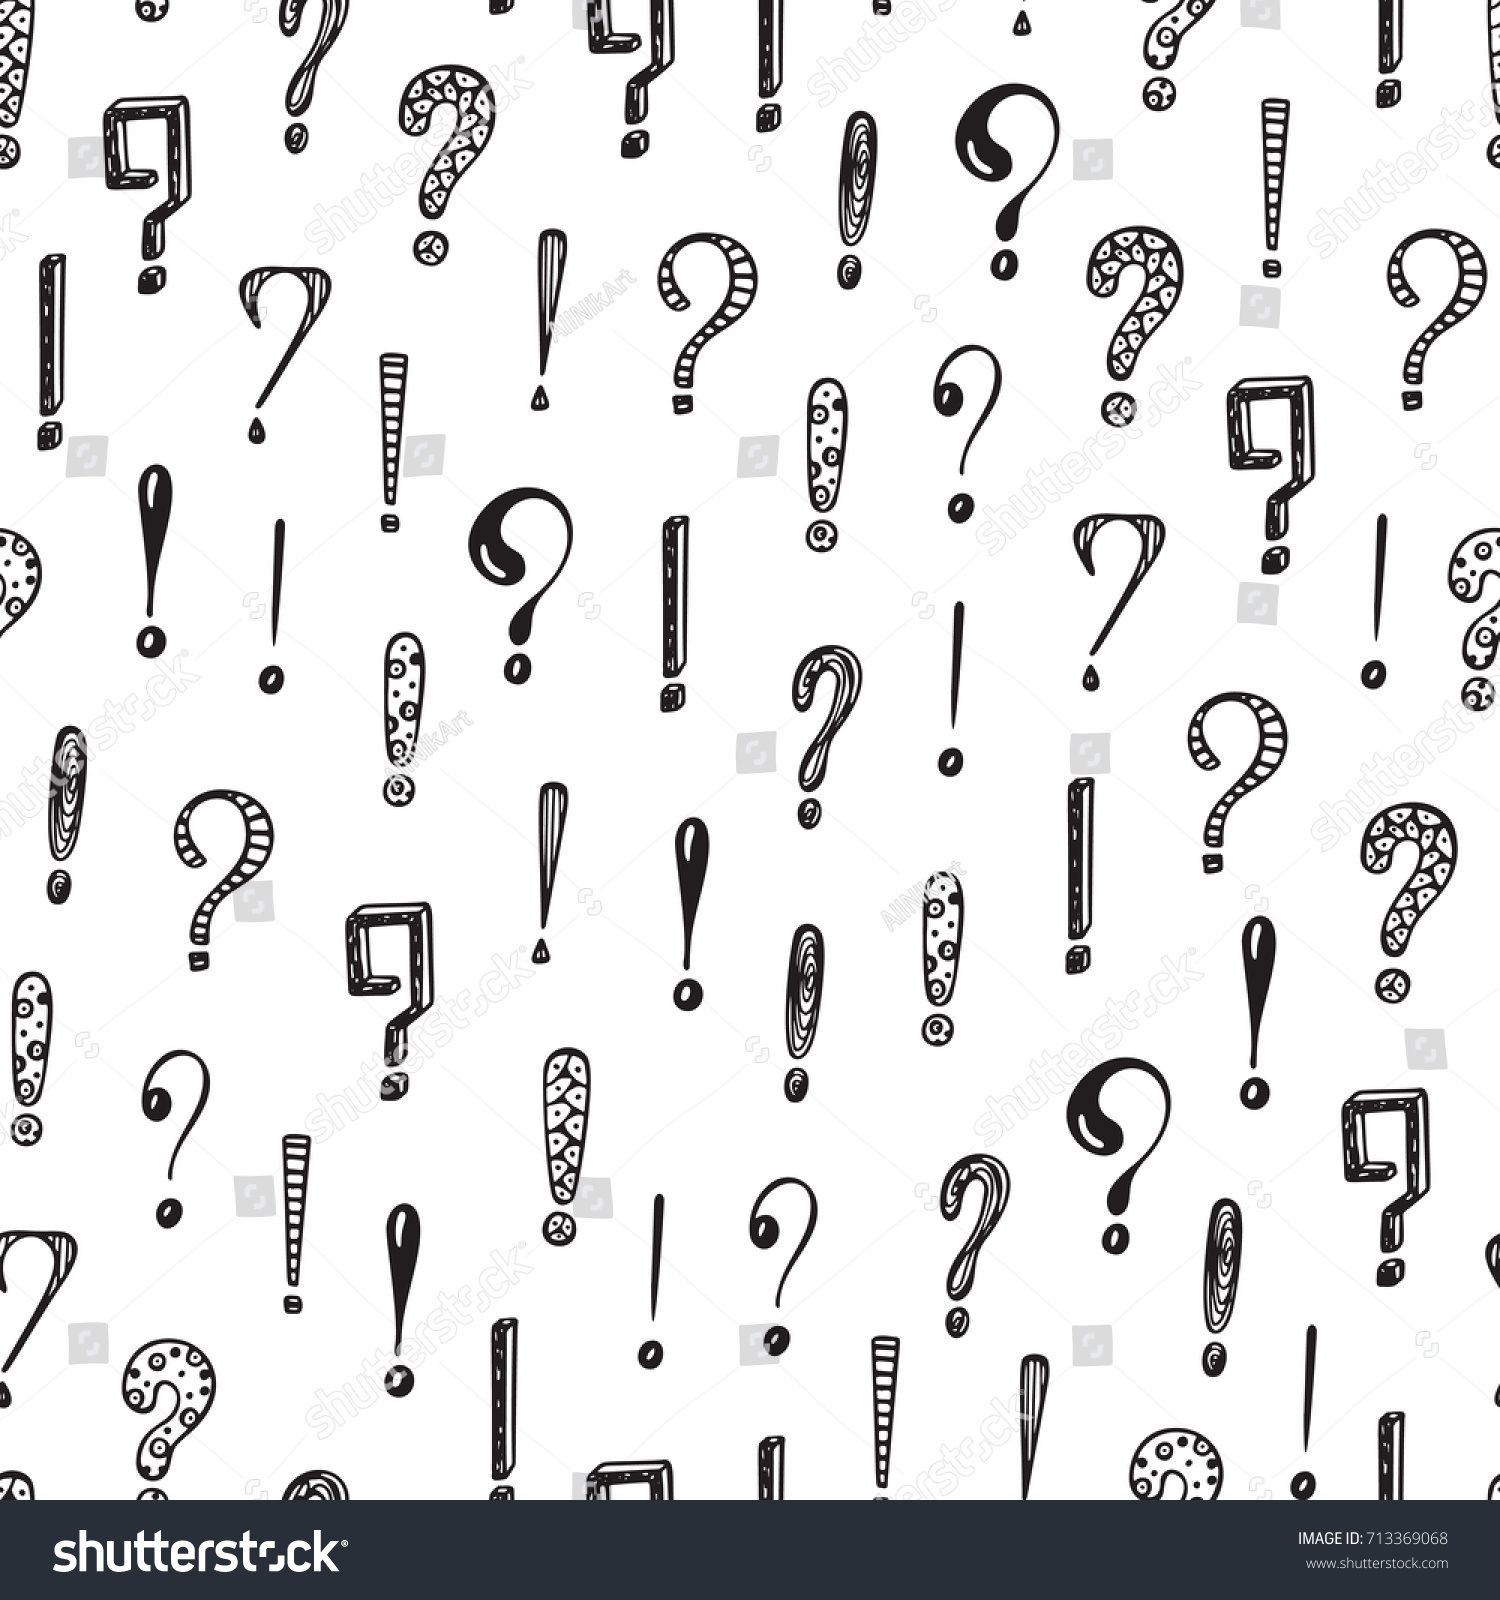 Seamless Vector Pattern Doodle Questions Marks Stock Vector Royalty Free 713369068 Shutterstock 7867